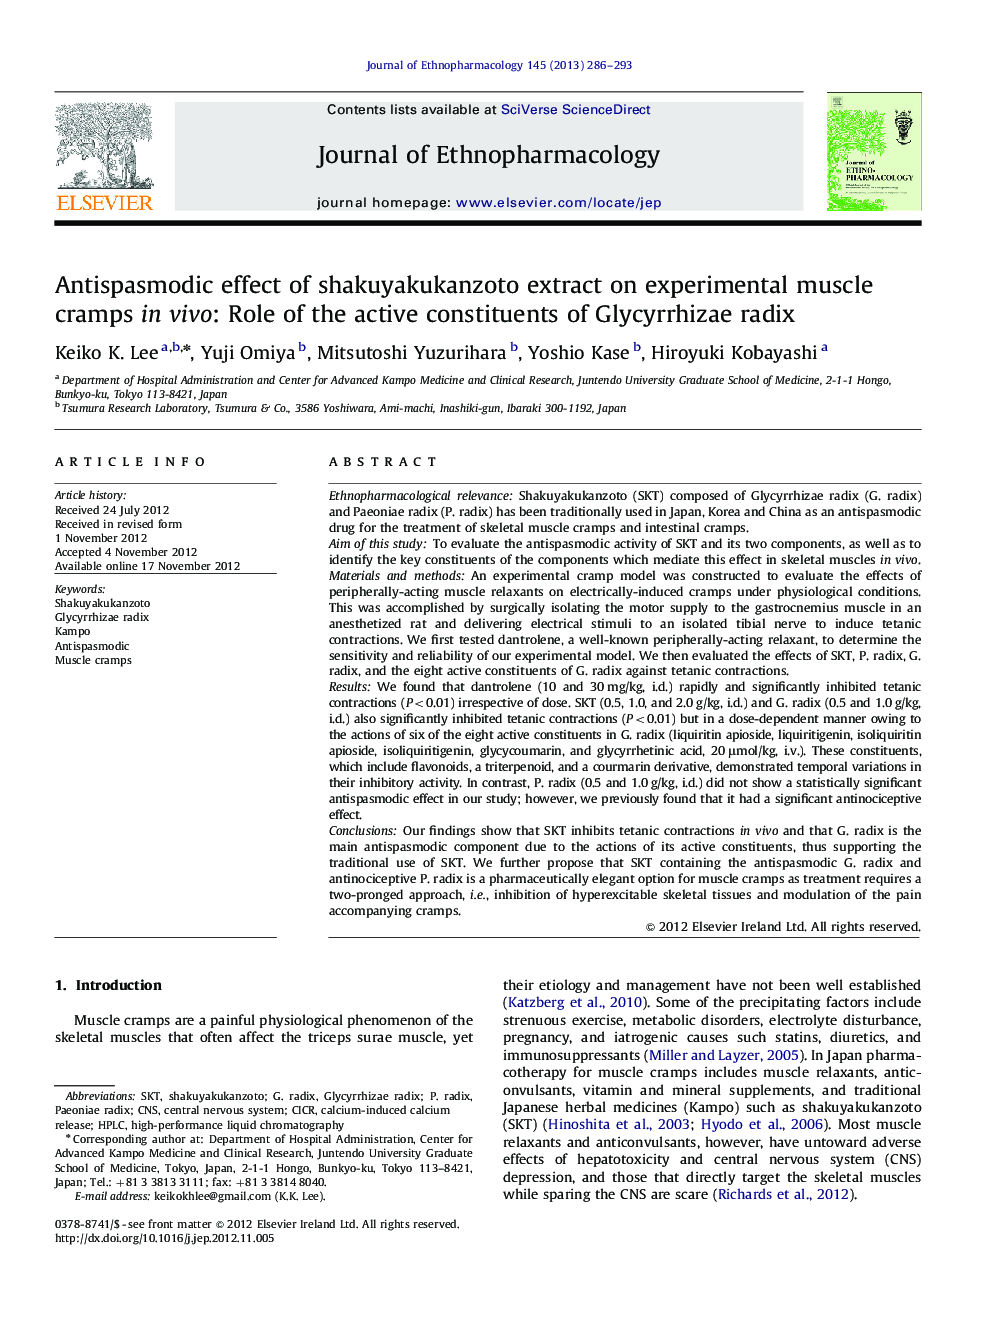 Antispasmodic effect of shakuyakukanzoto extract on experimental muscle cramps in vivo: Role of the active constituents of Glycyrrhizae radix